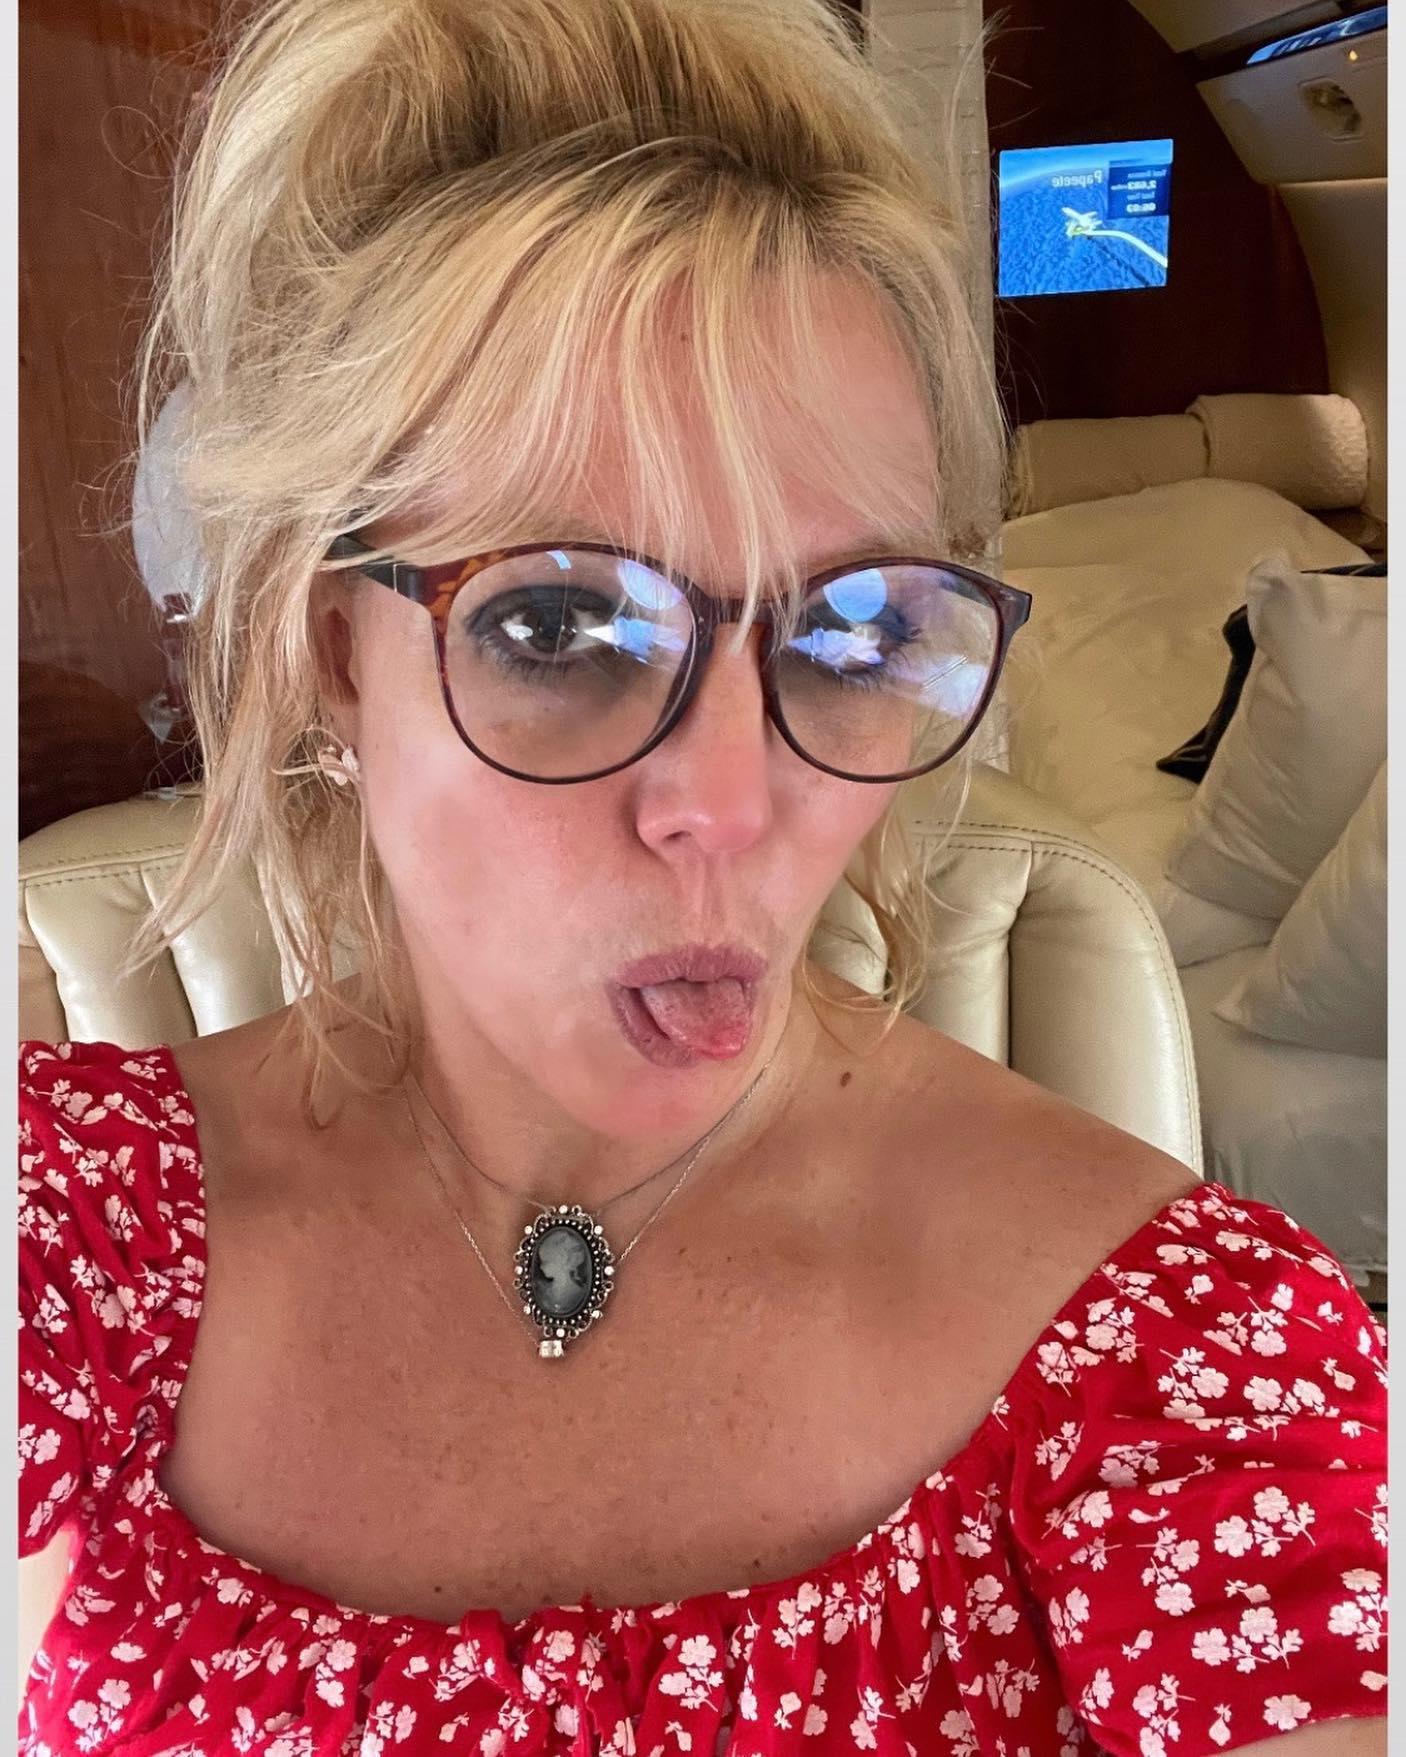 Britney Spears posts close-up selfie on private plane